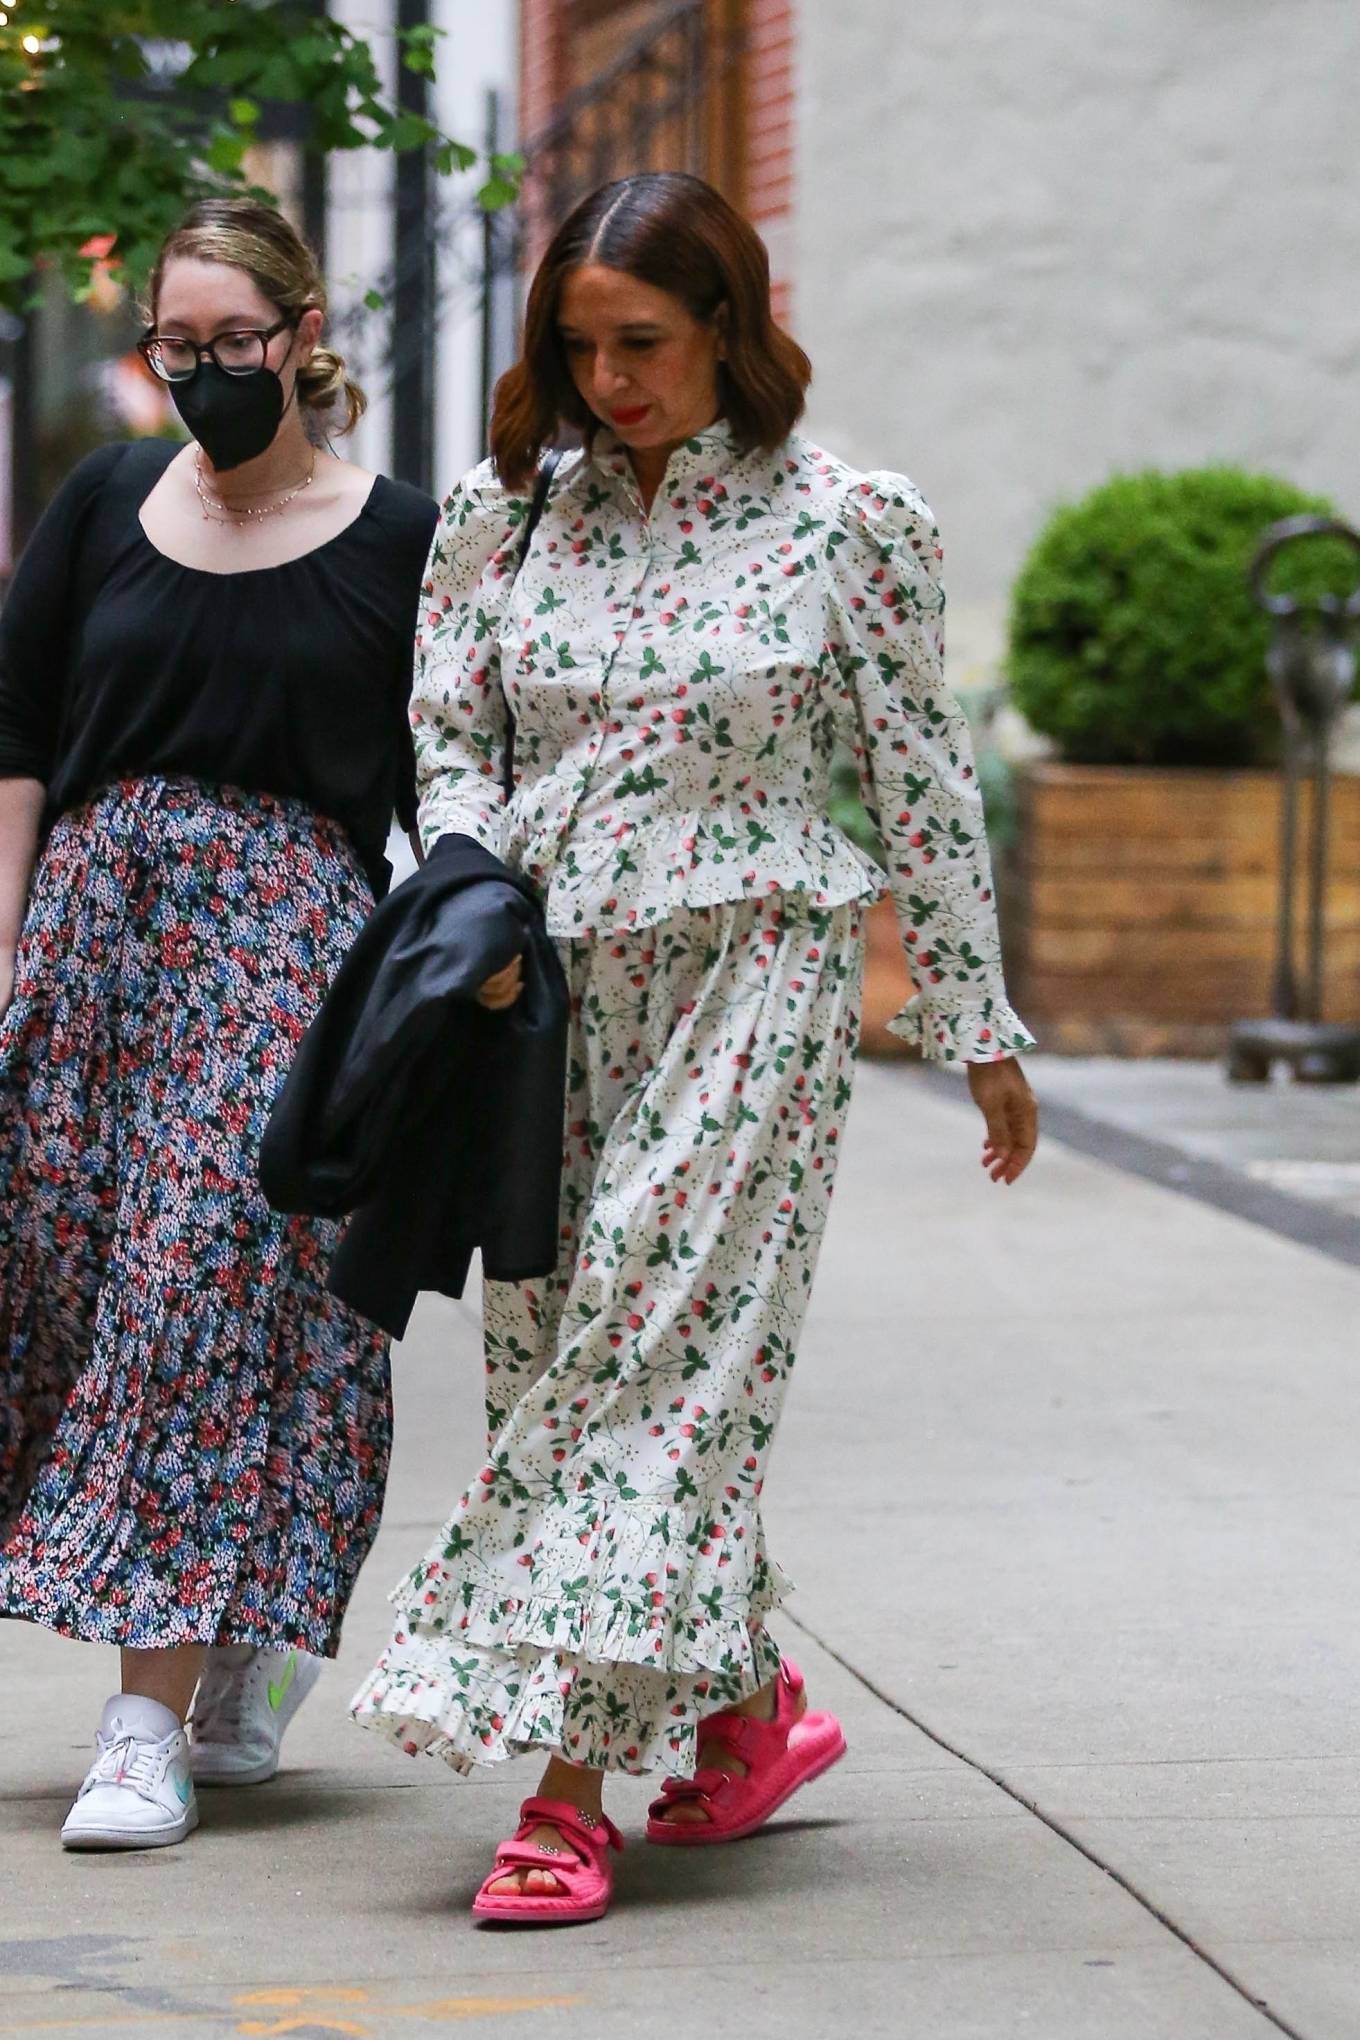 Maya Rudolph 2022 : Maya Rudolph – In a floral dress steps out in New York-02